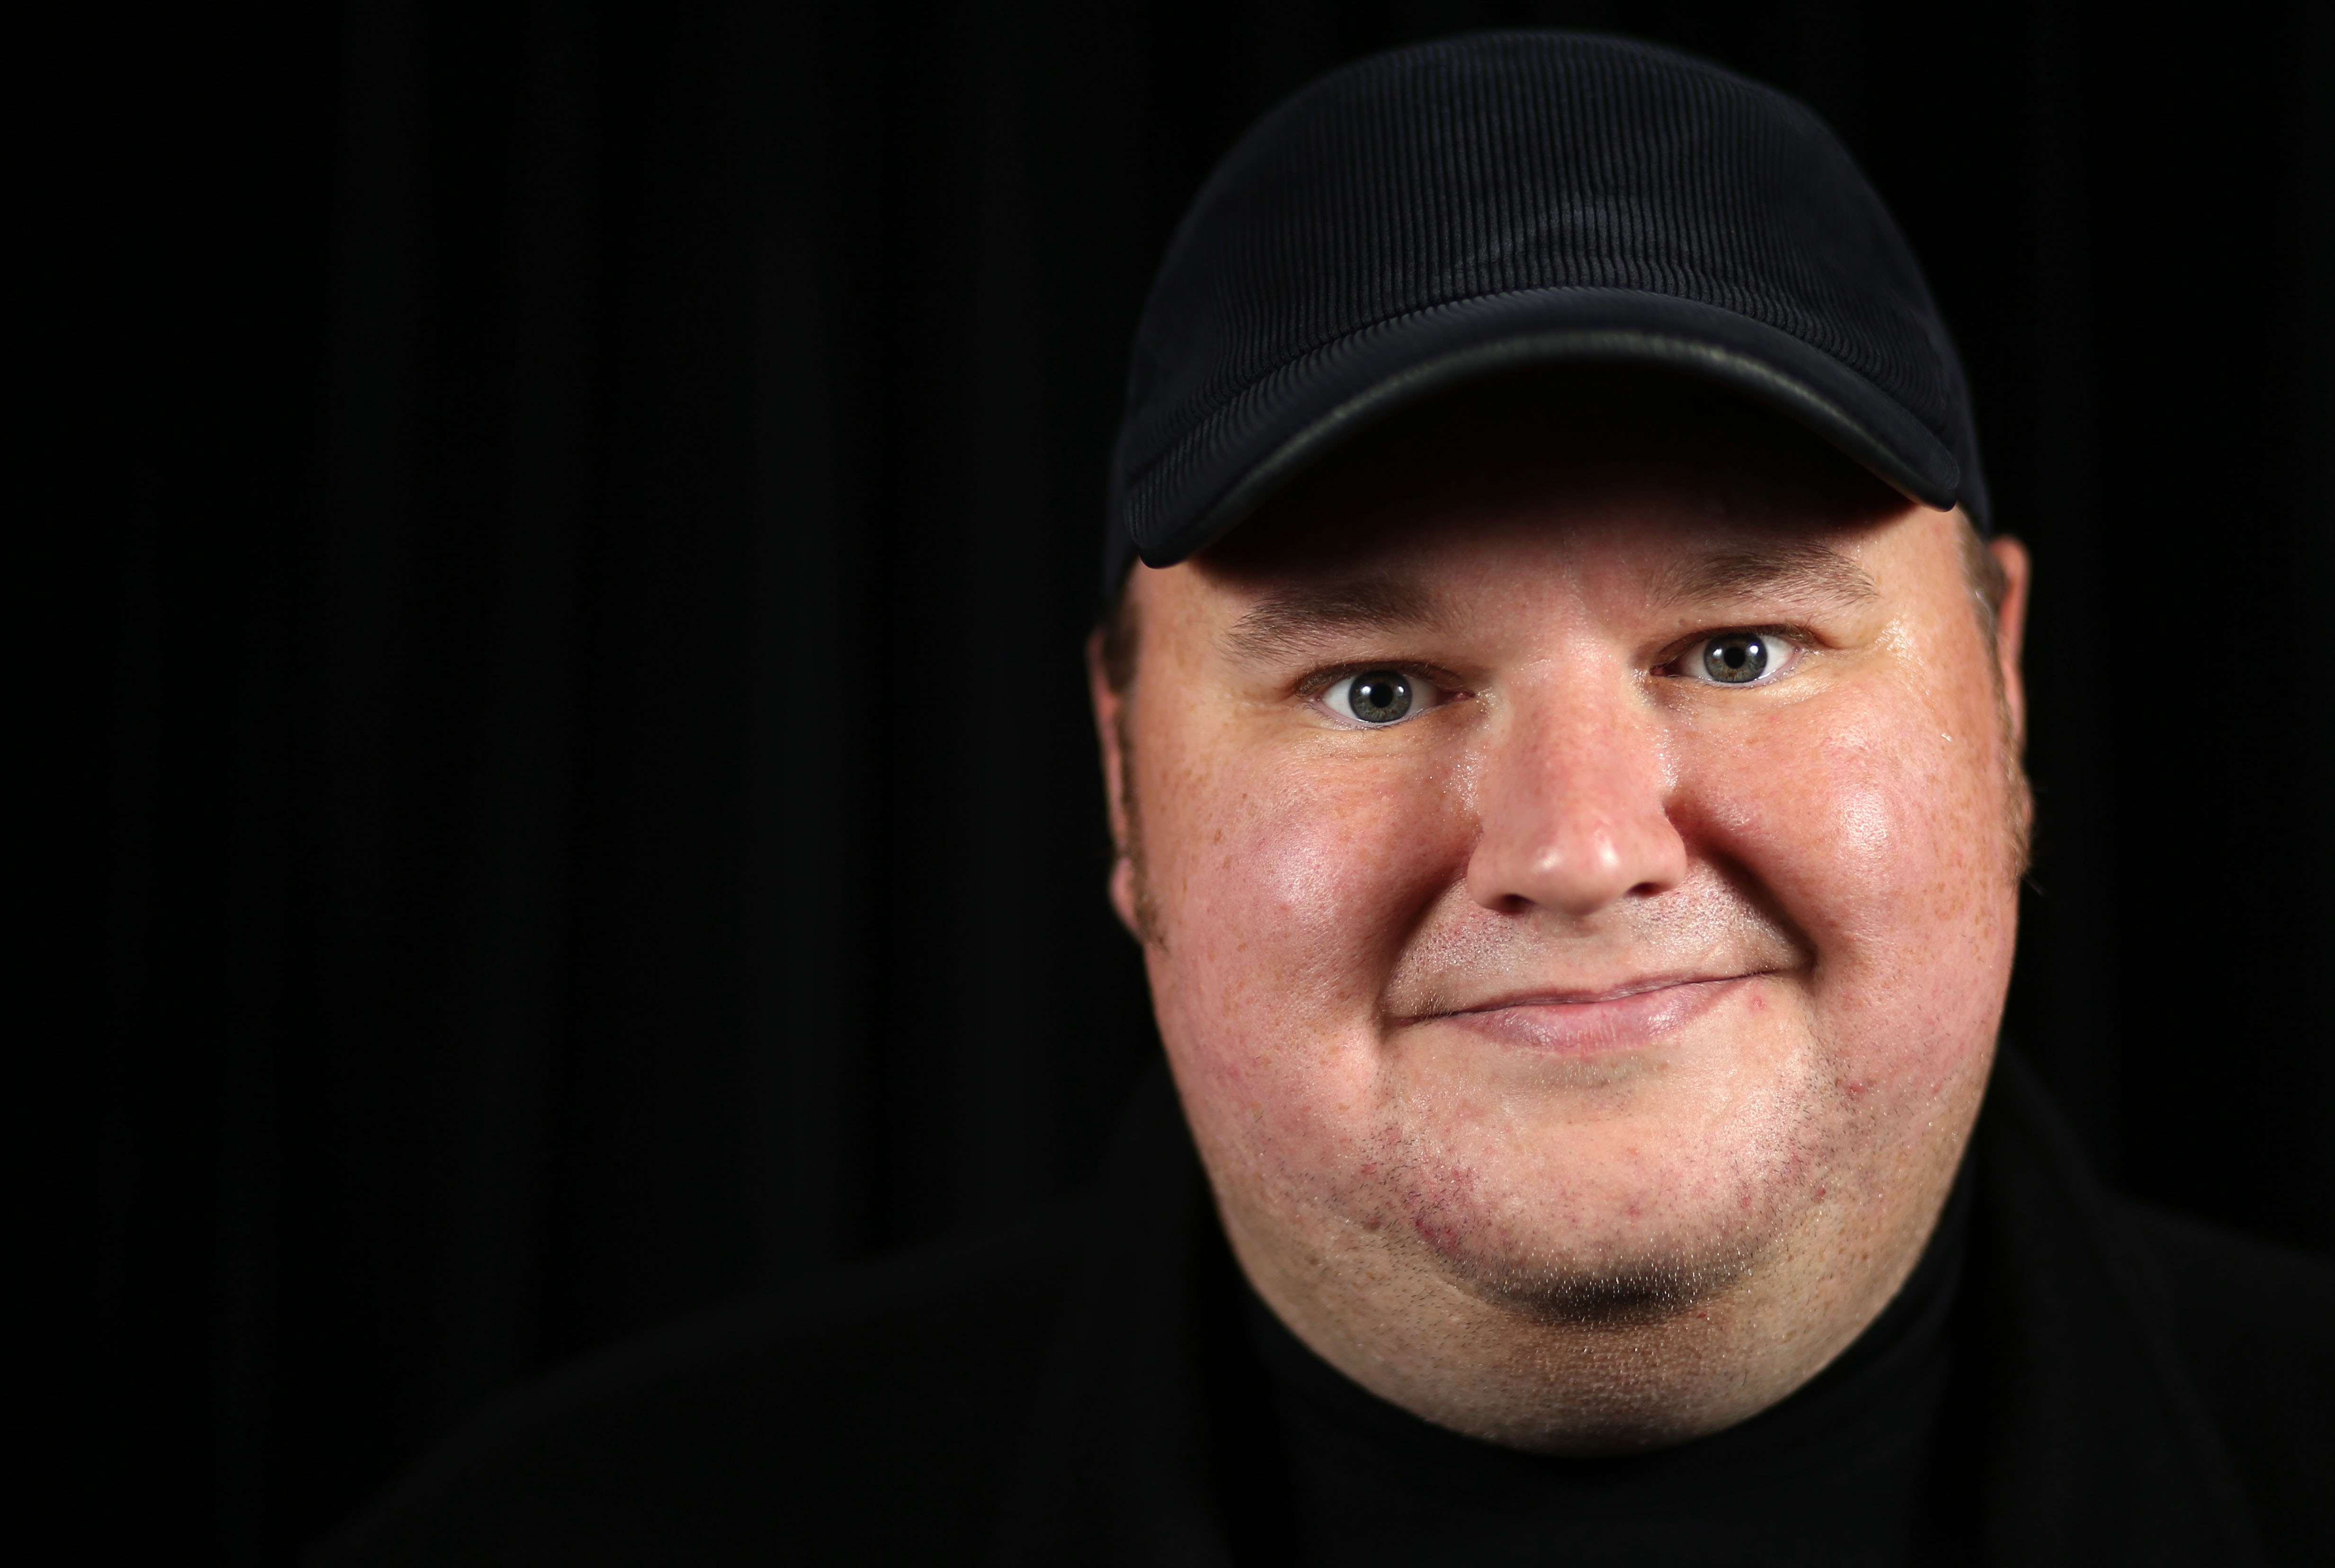 Kim Dotcom and three of his colleagues are appealing a December lower-court decision which allows them to be extradited to the US to face conspiracy, racketeering and money-laundering charges. If found guilty, they could face decades in jail. Photo: AFP